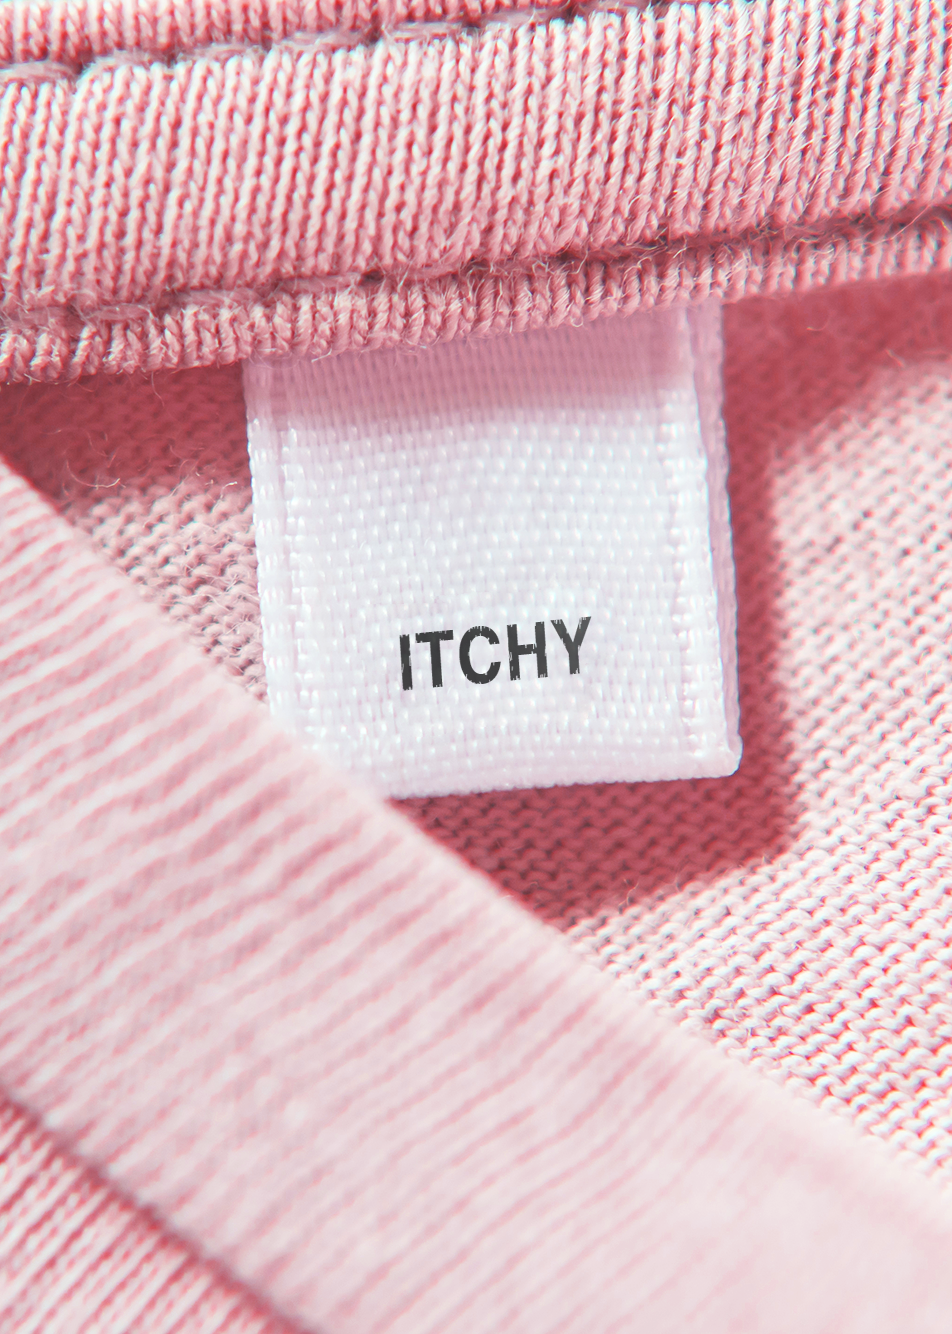 How to Find the Best Manufacturers for Tags for Clothes?